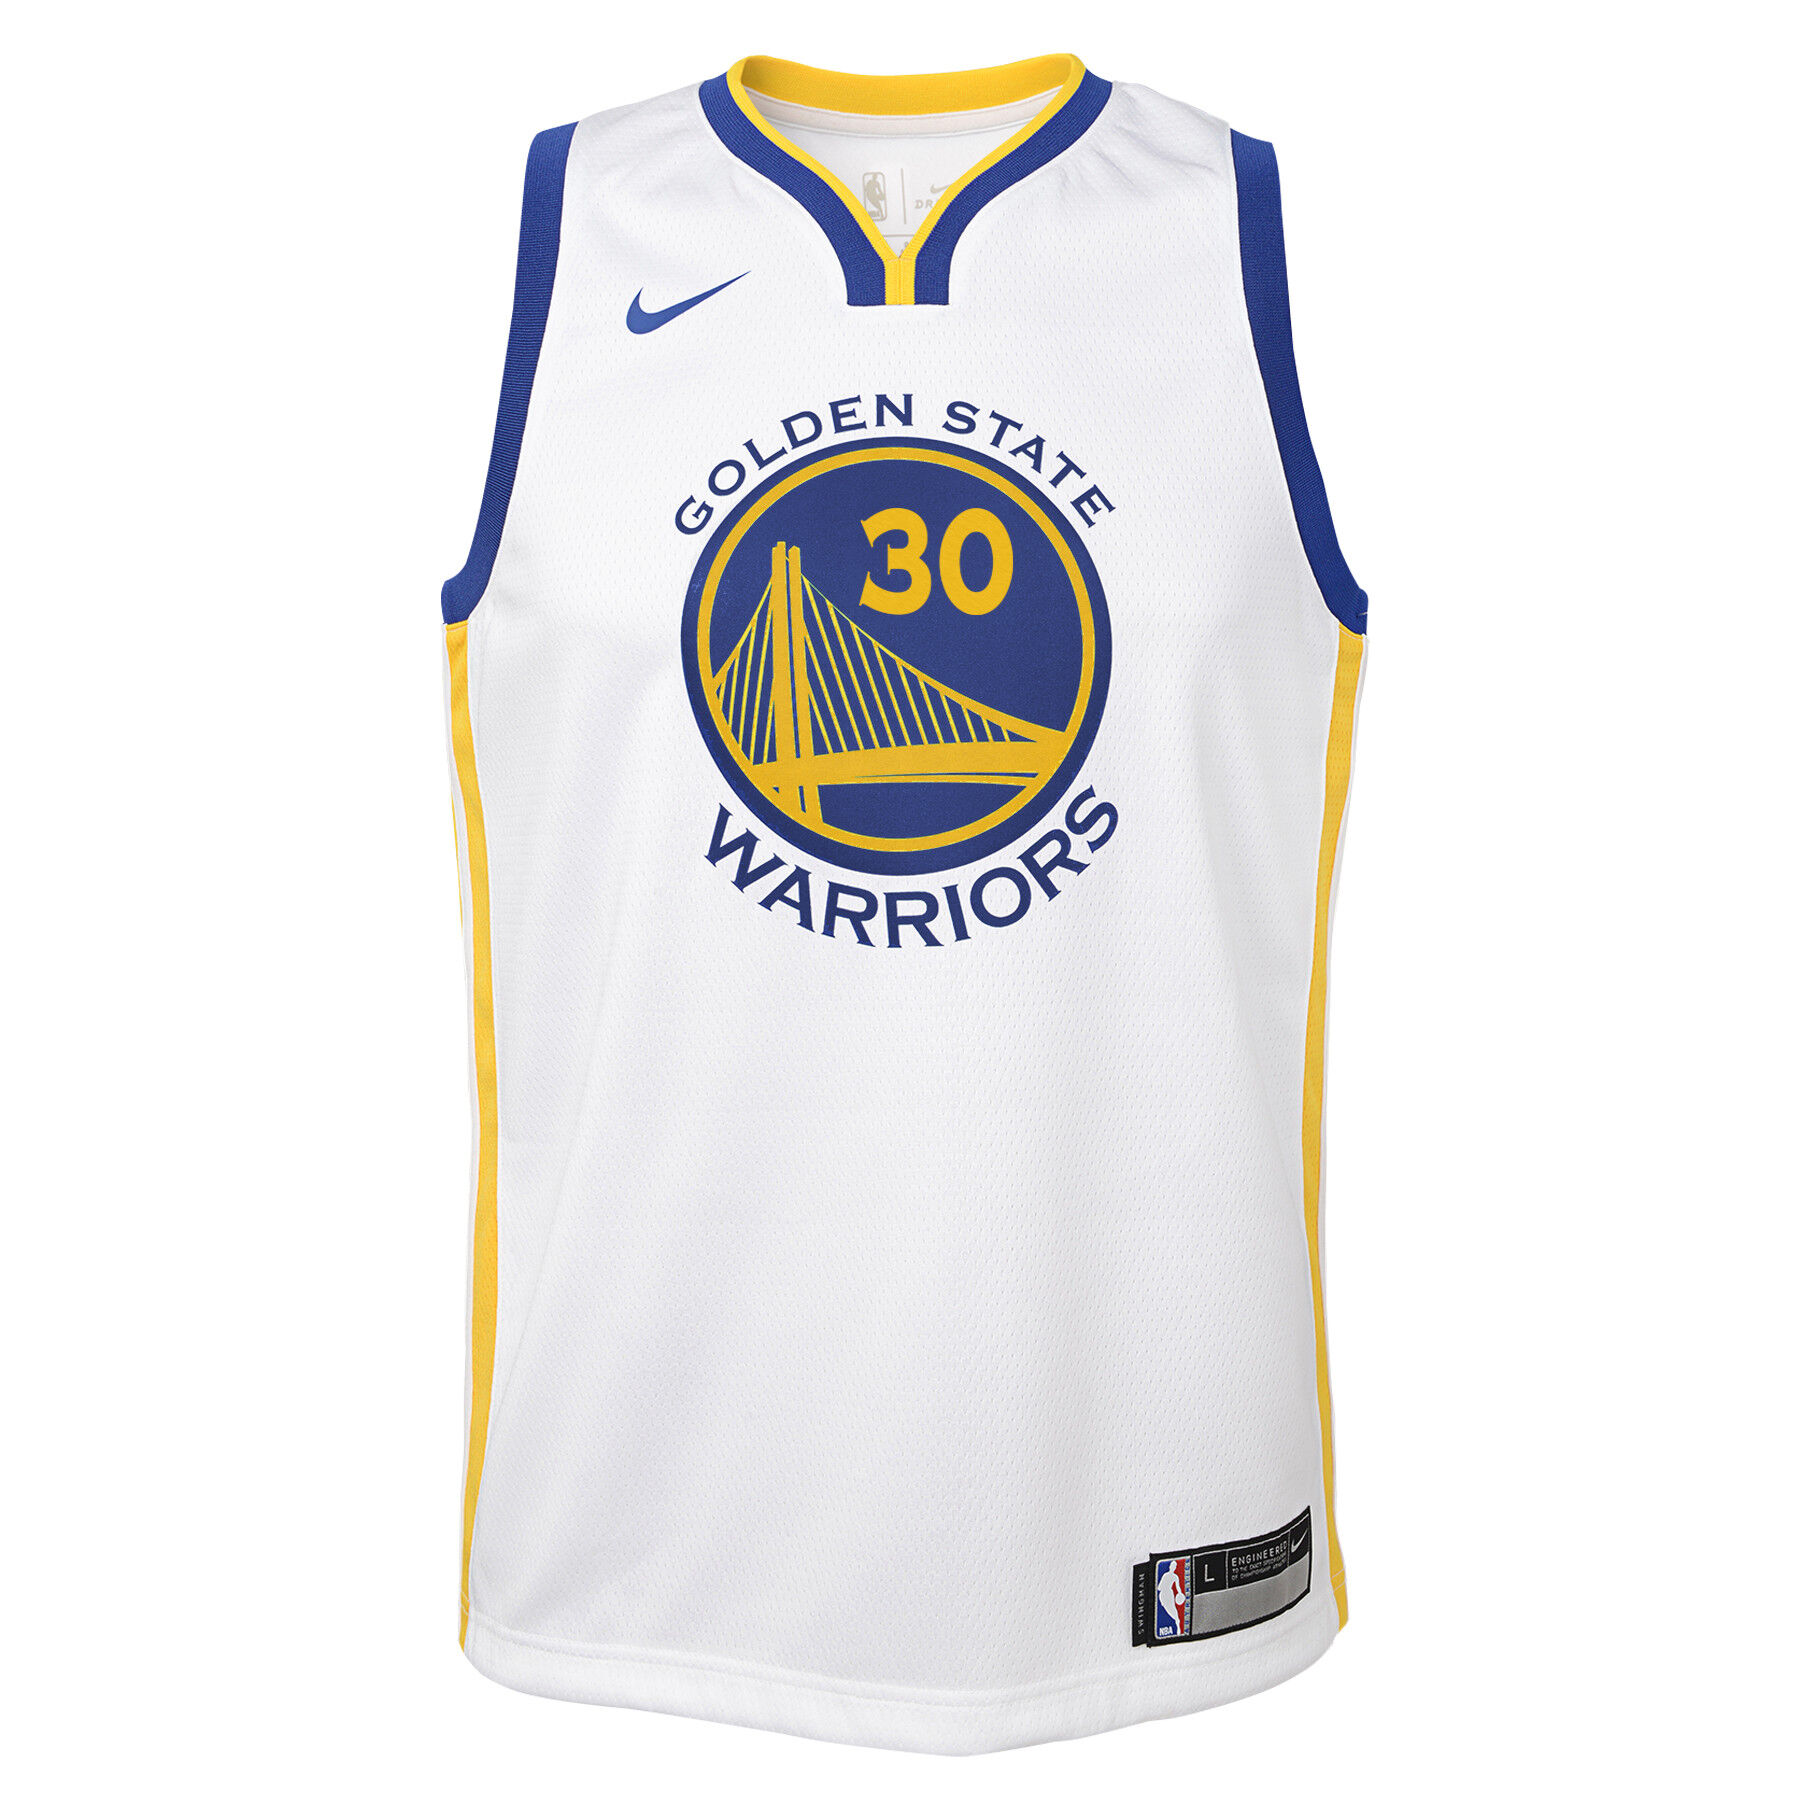 Steph Curry Size Medium (10-12) Youth Jersey